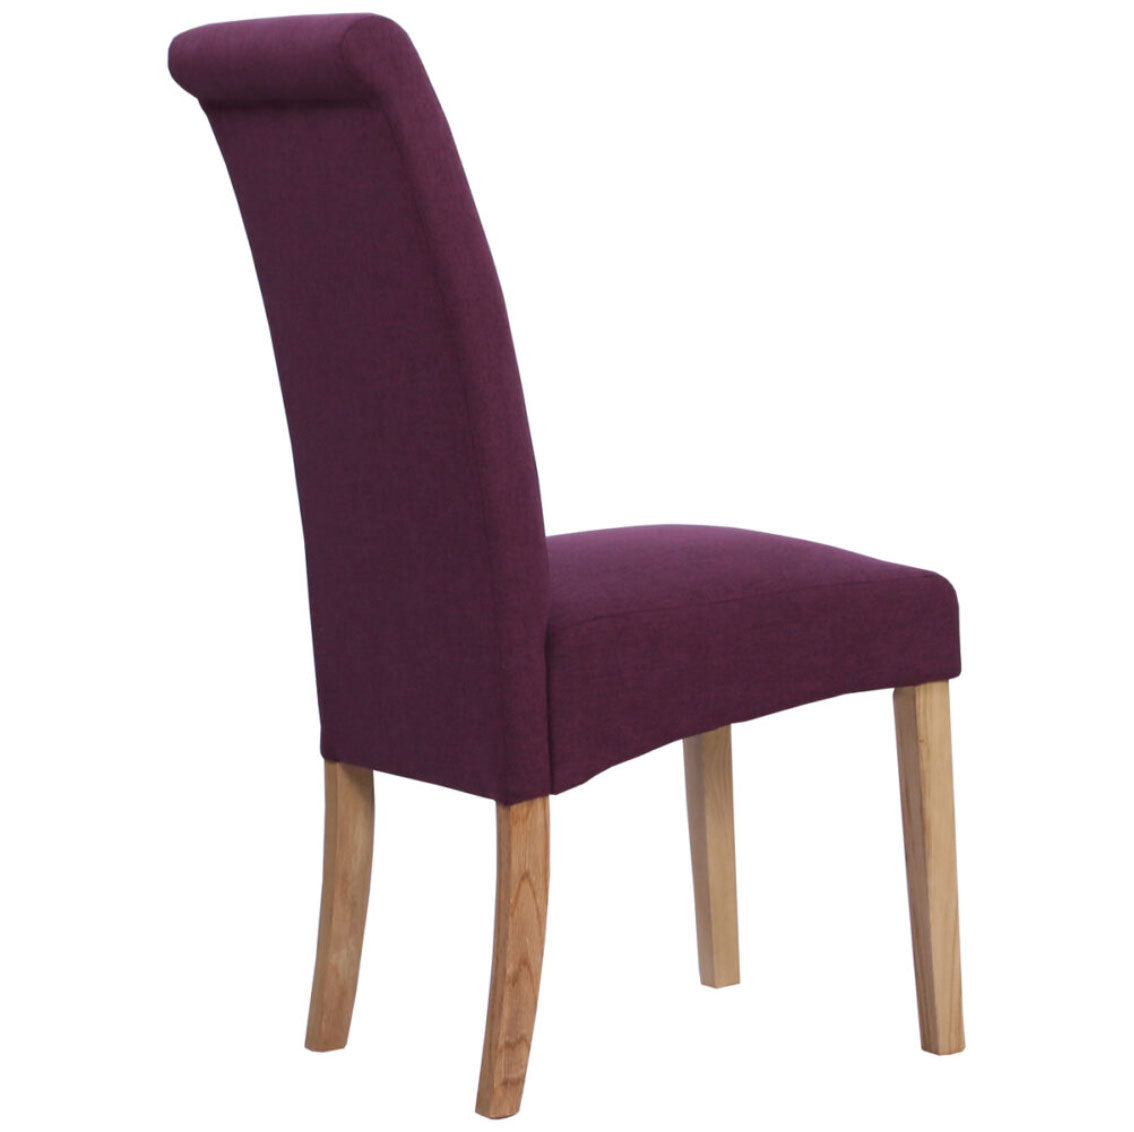 Manor Collection Westbury Rollback Chair